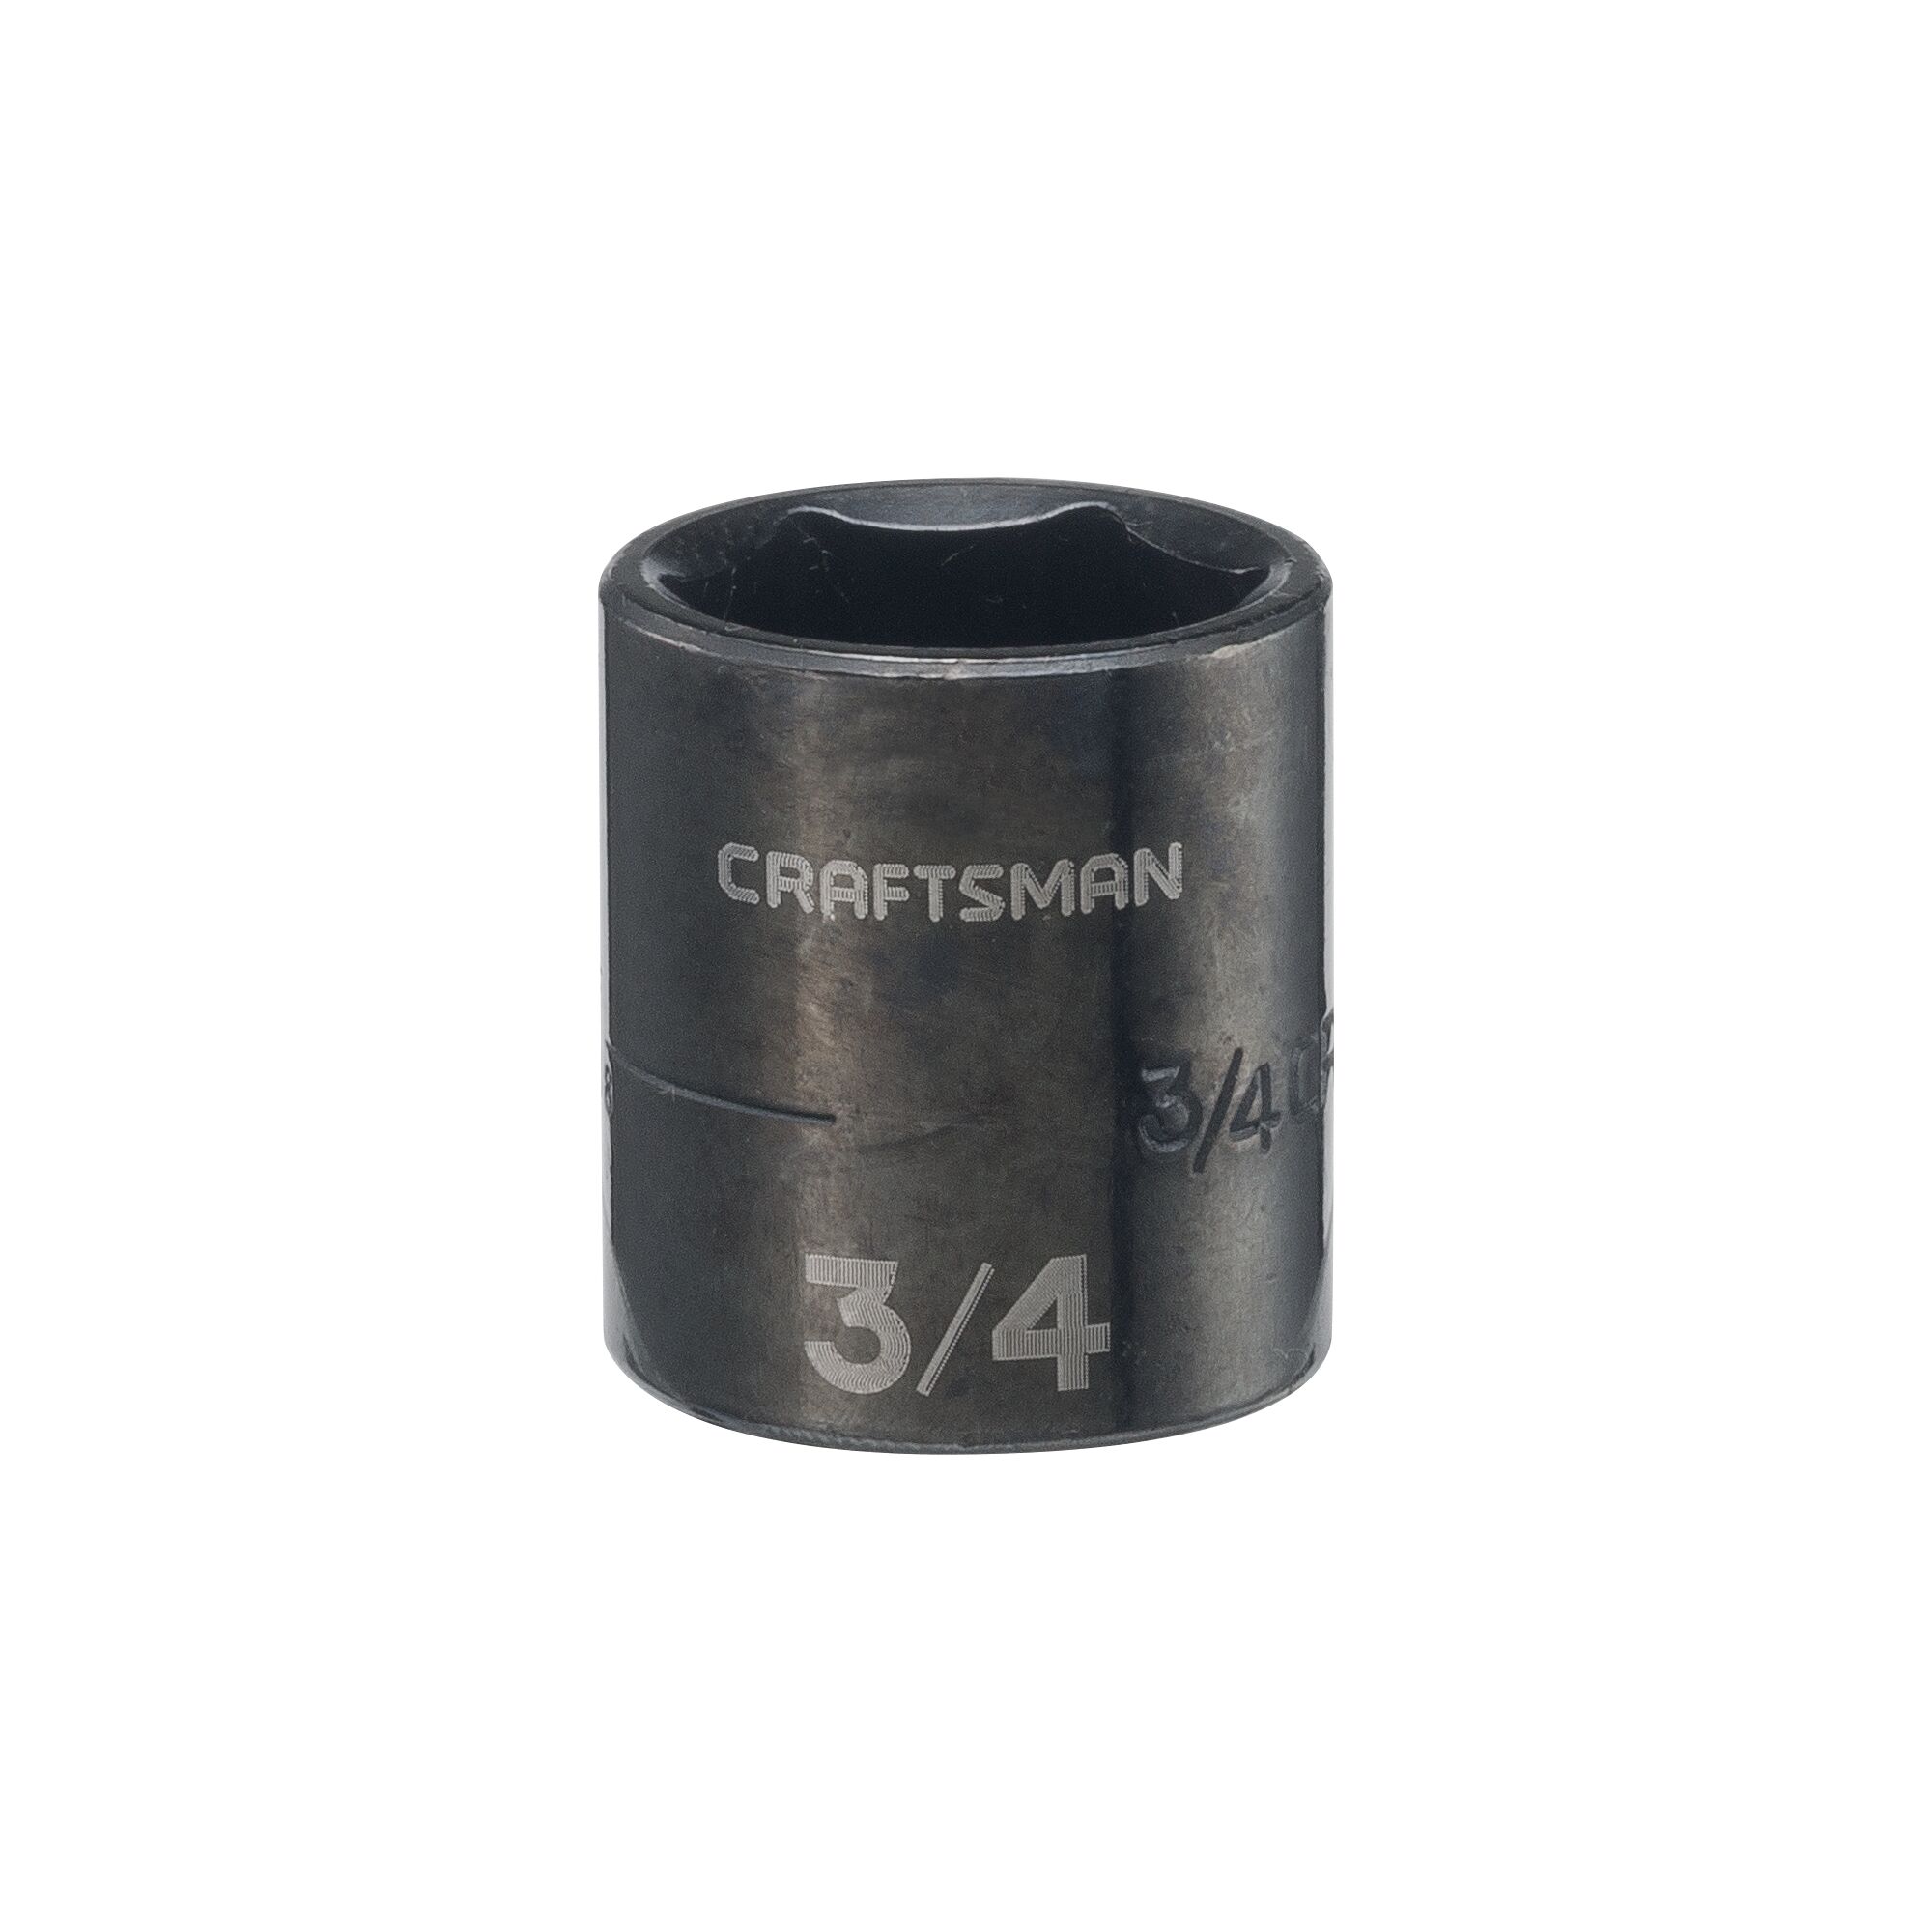 3 eighths inch drive 3 quarters inch s a e impact shallow socket.
